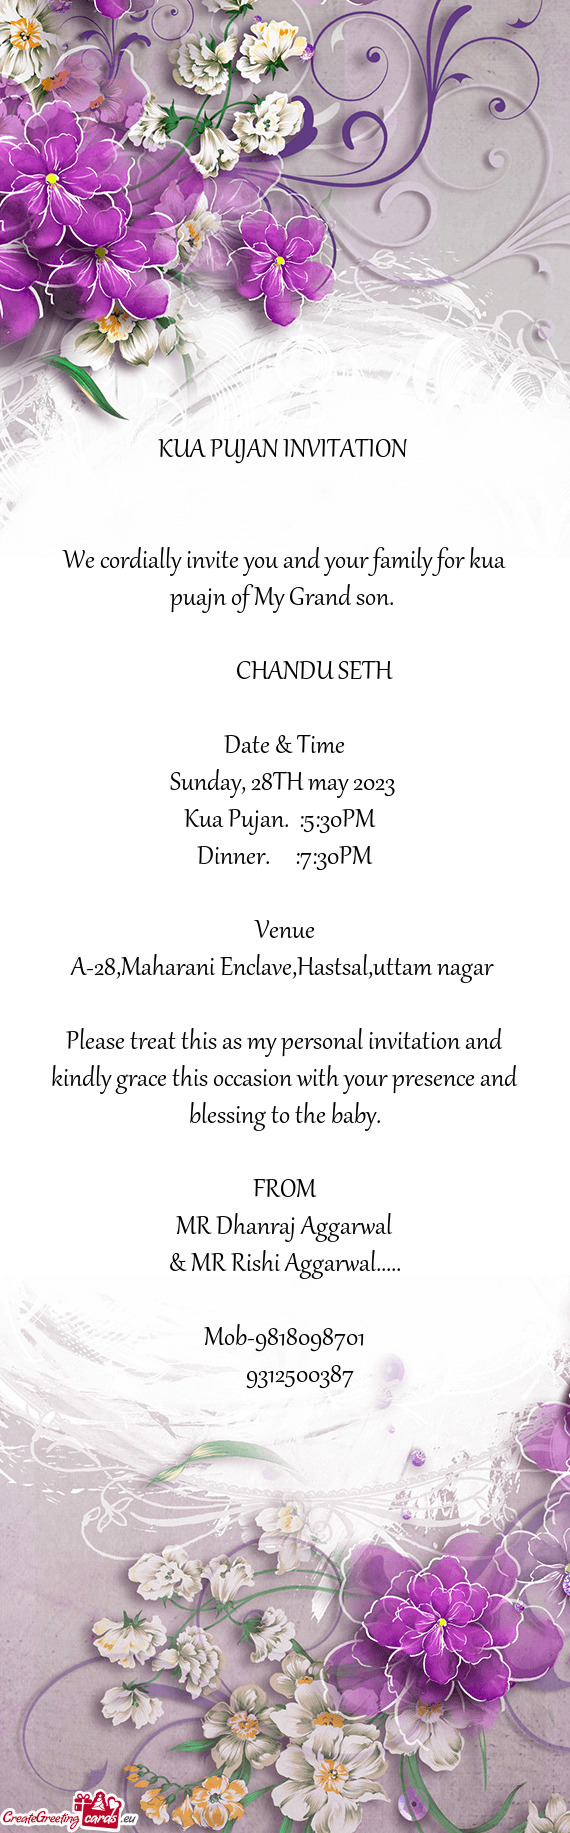 We cordially invite you and your family for kua puajn of My Grand son